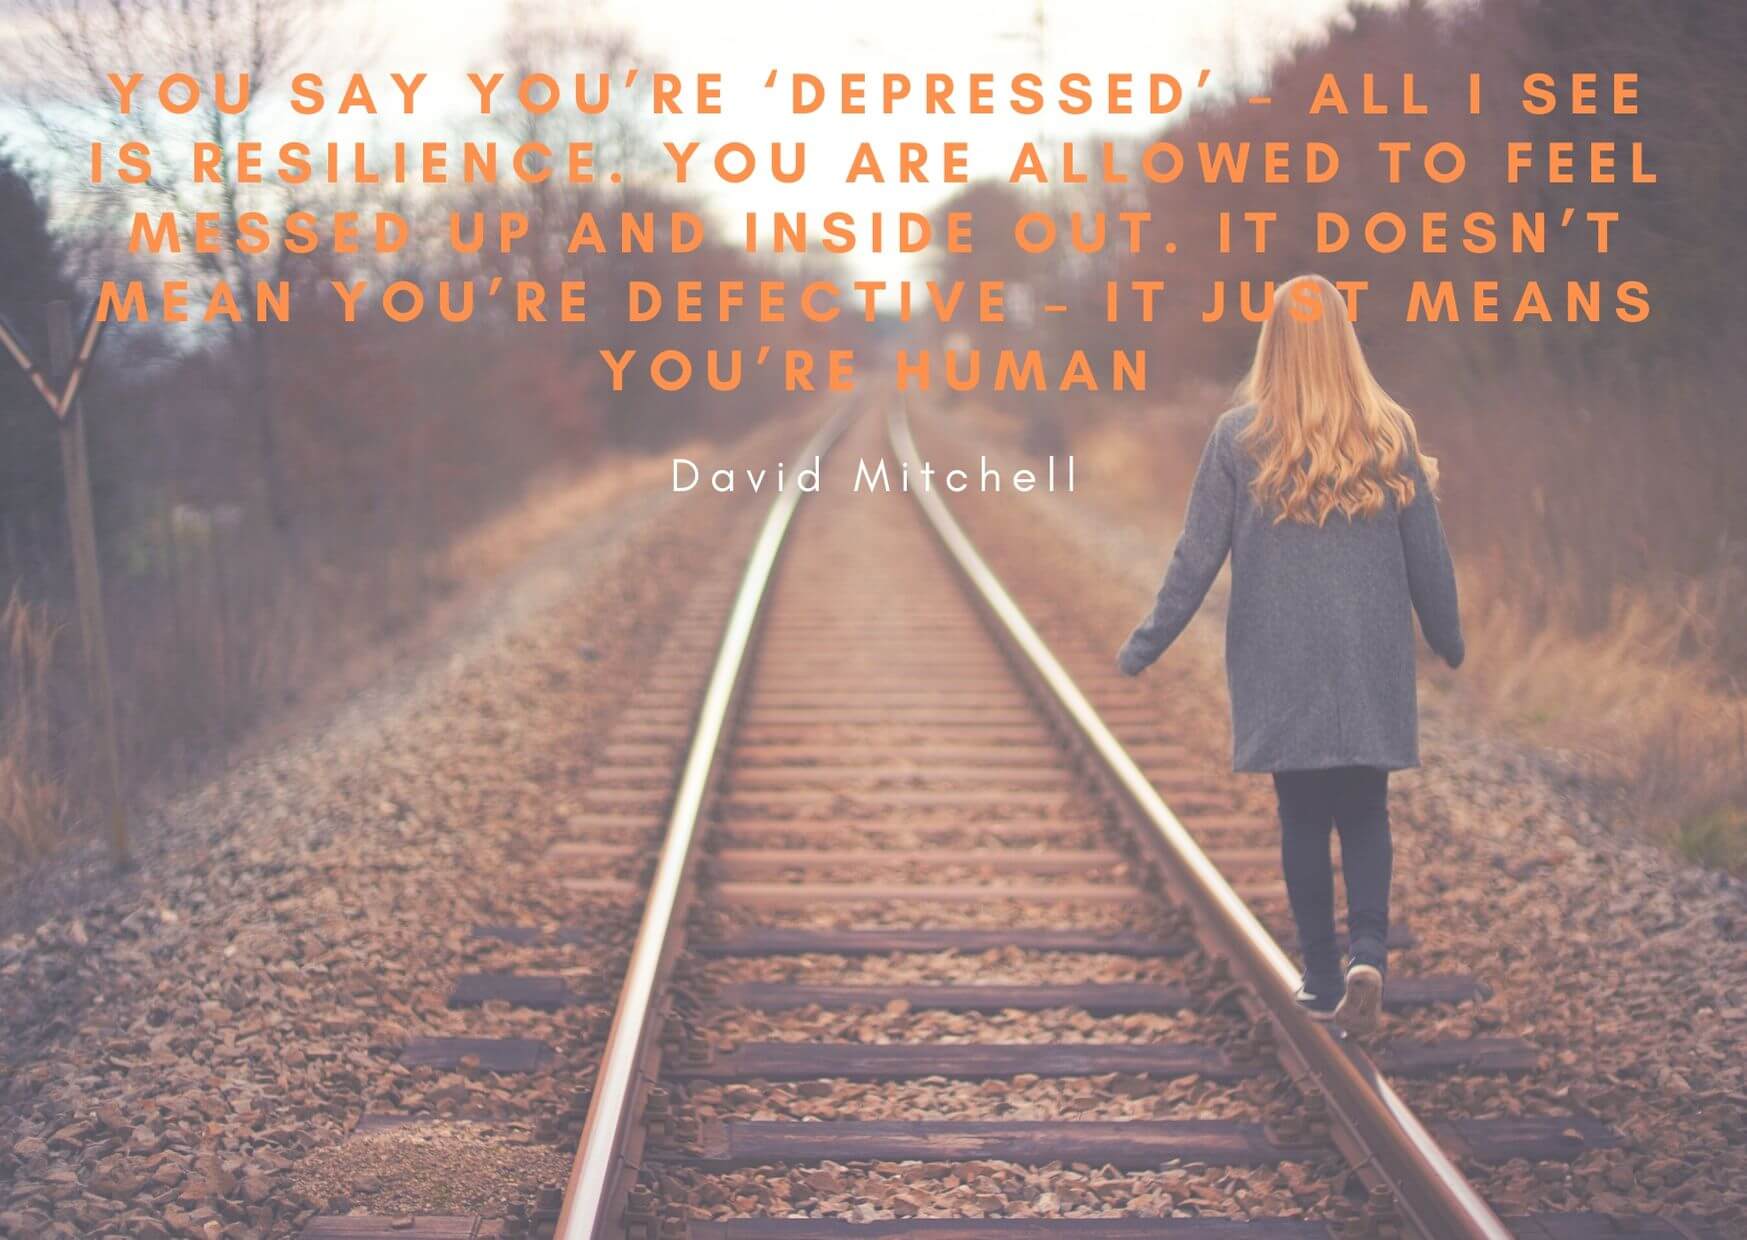 Motivational Quotes From Depression - Campingqur